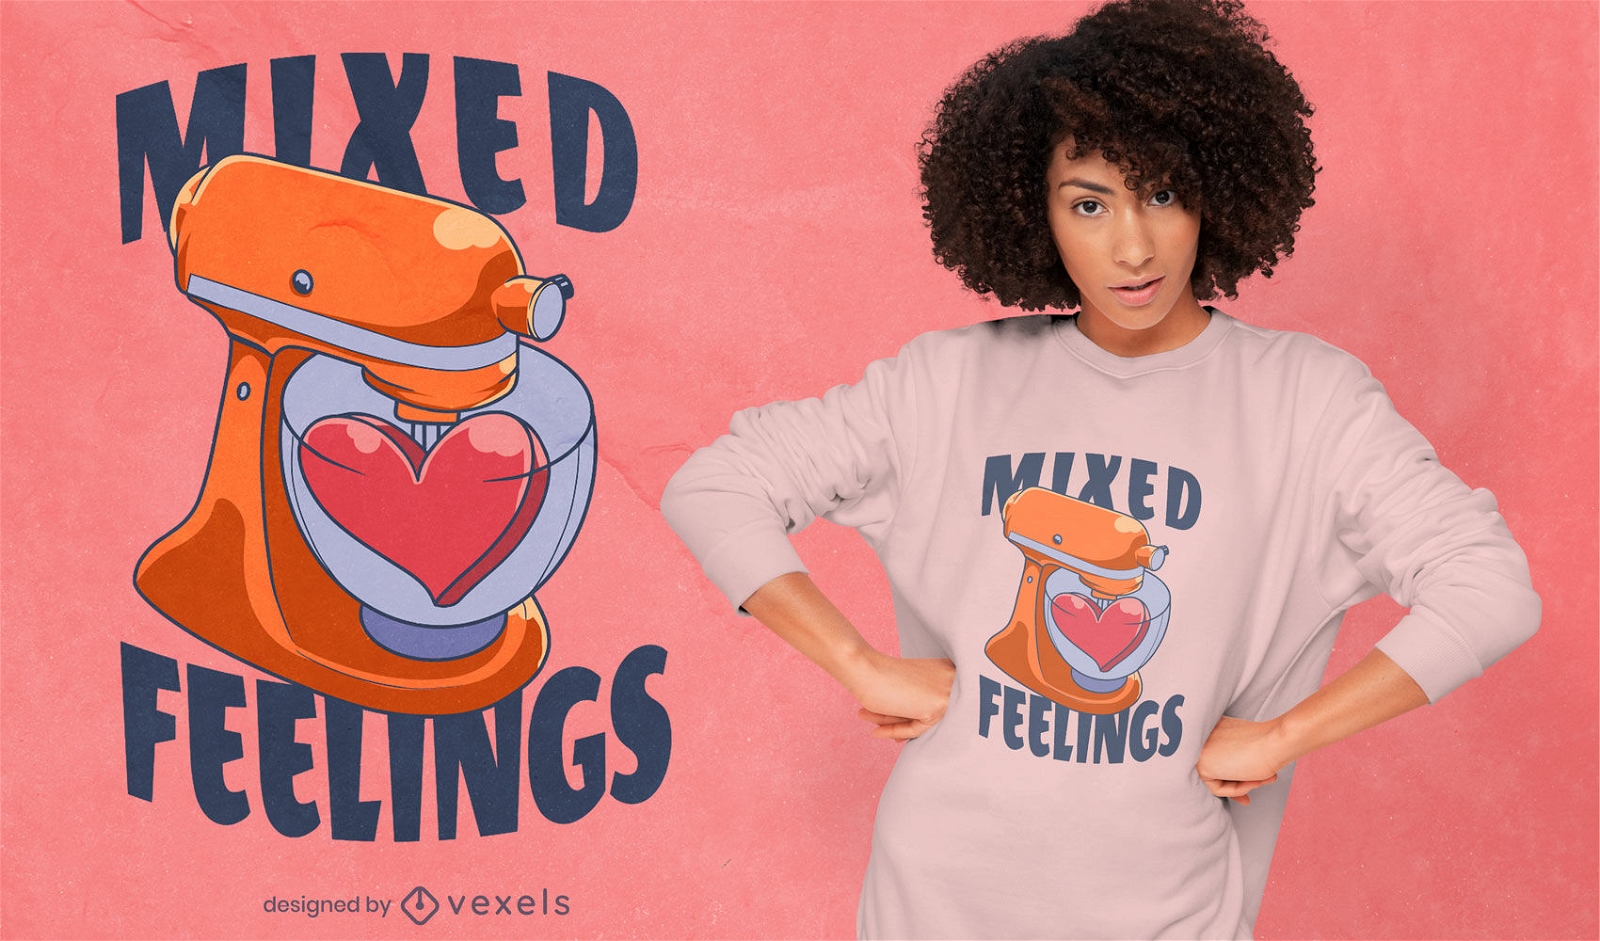 Beater mixed feelings quote t-shirt design